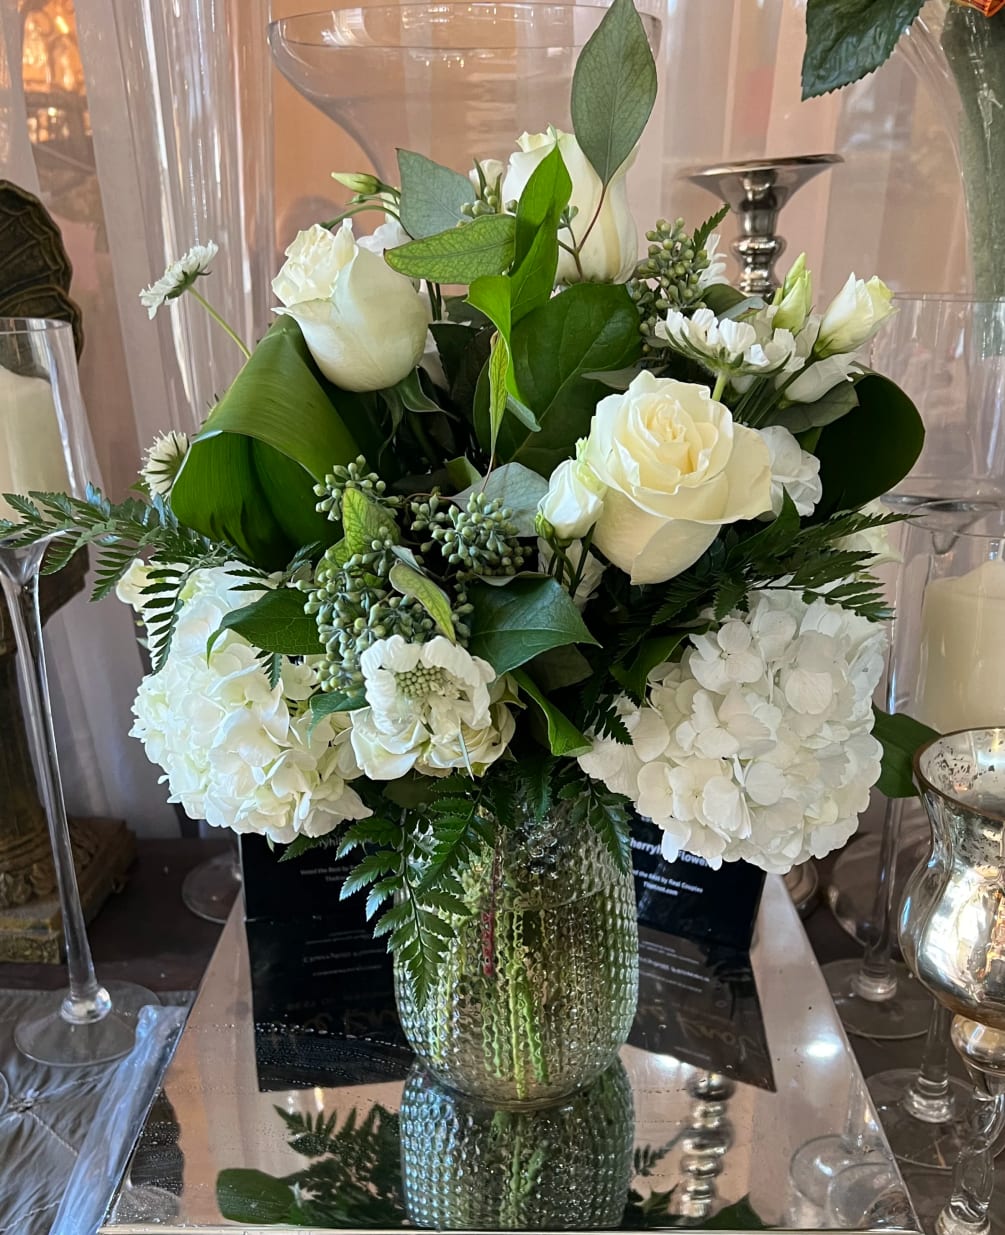 A tall clear vase with all white flowers and greenery. 

Shown in